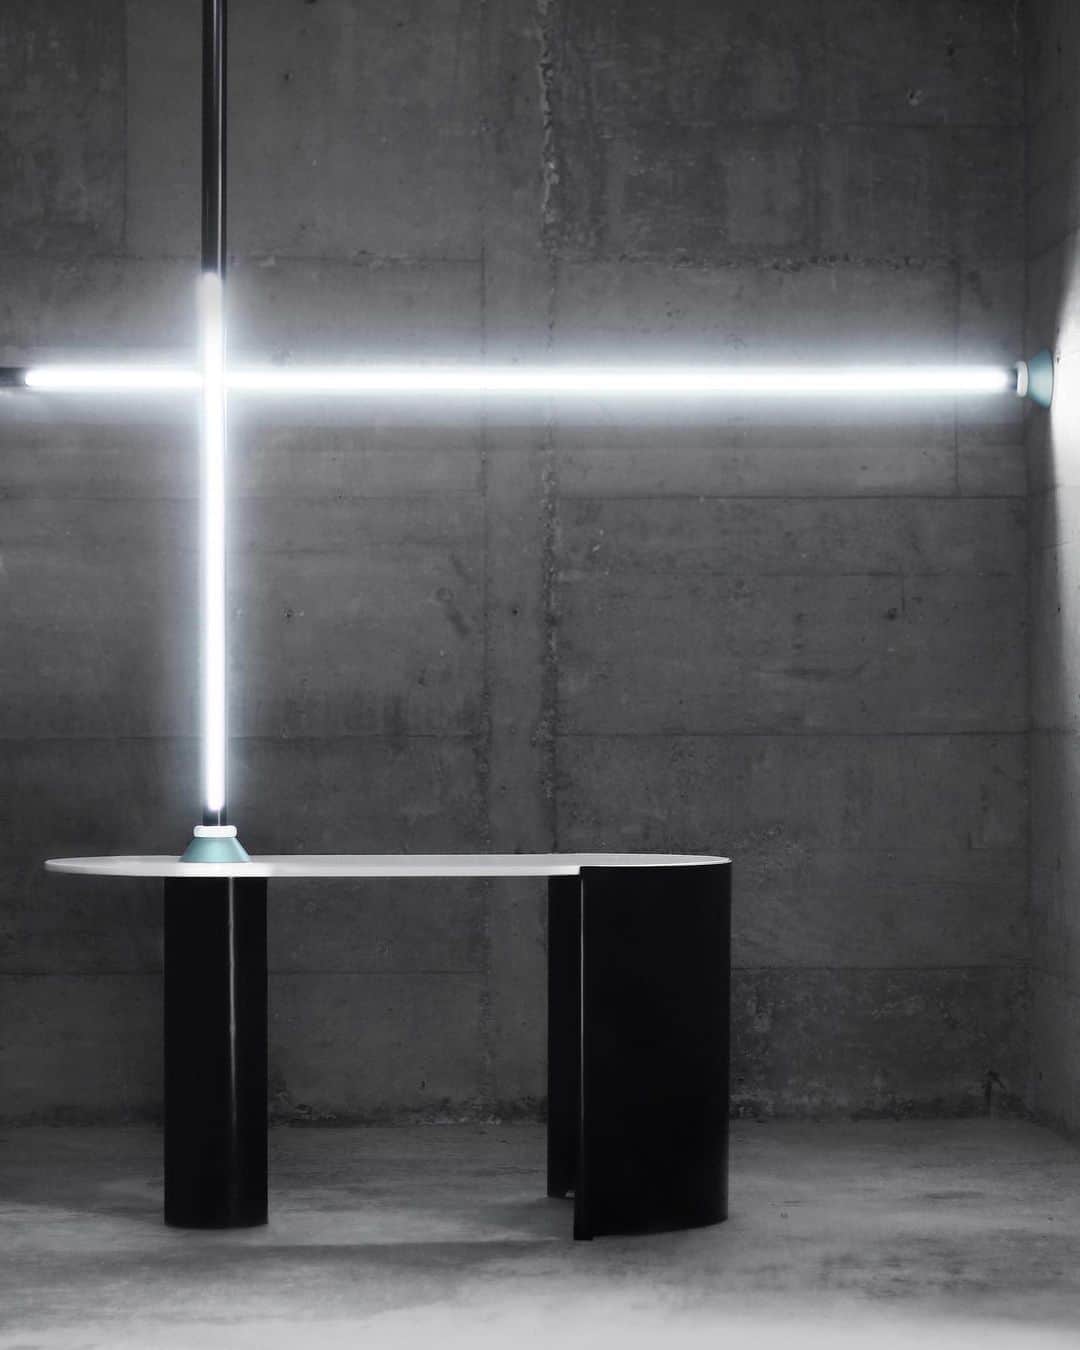 Monica Sordoのインスタグラム：「Taguao Lucerna Desk and Pole (2022) Aluminum, Crystallized Glass, Led. ~ Handcrafted in Caracas by Roberto Sordo & Monica Sordo. ~ Taguao Series by @mlshbts」